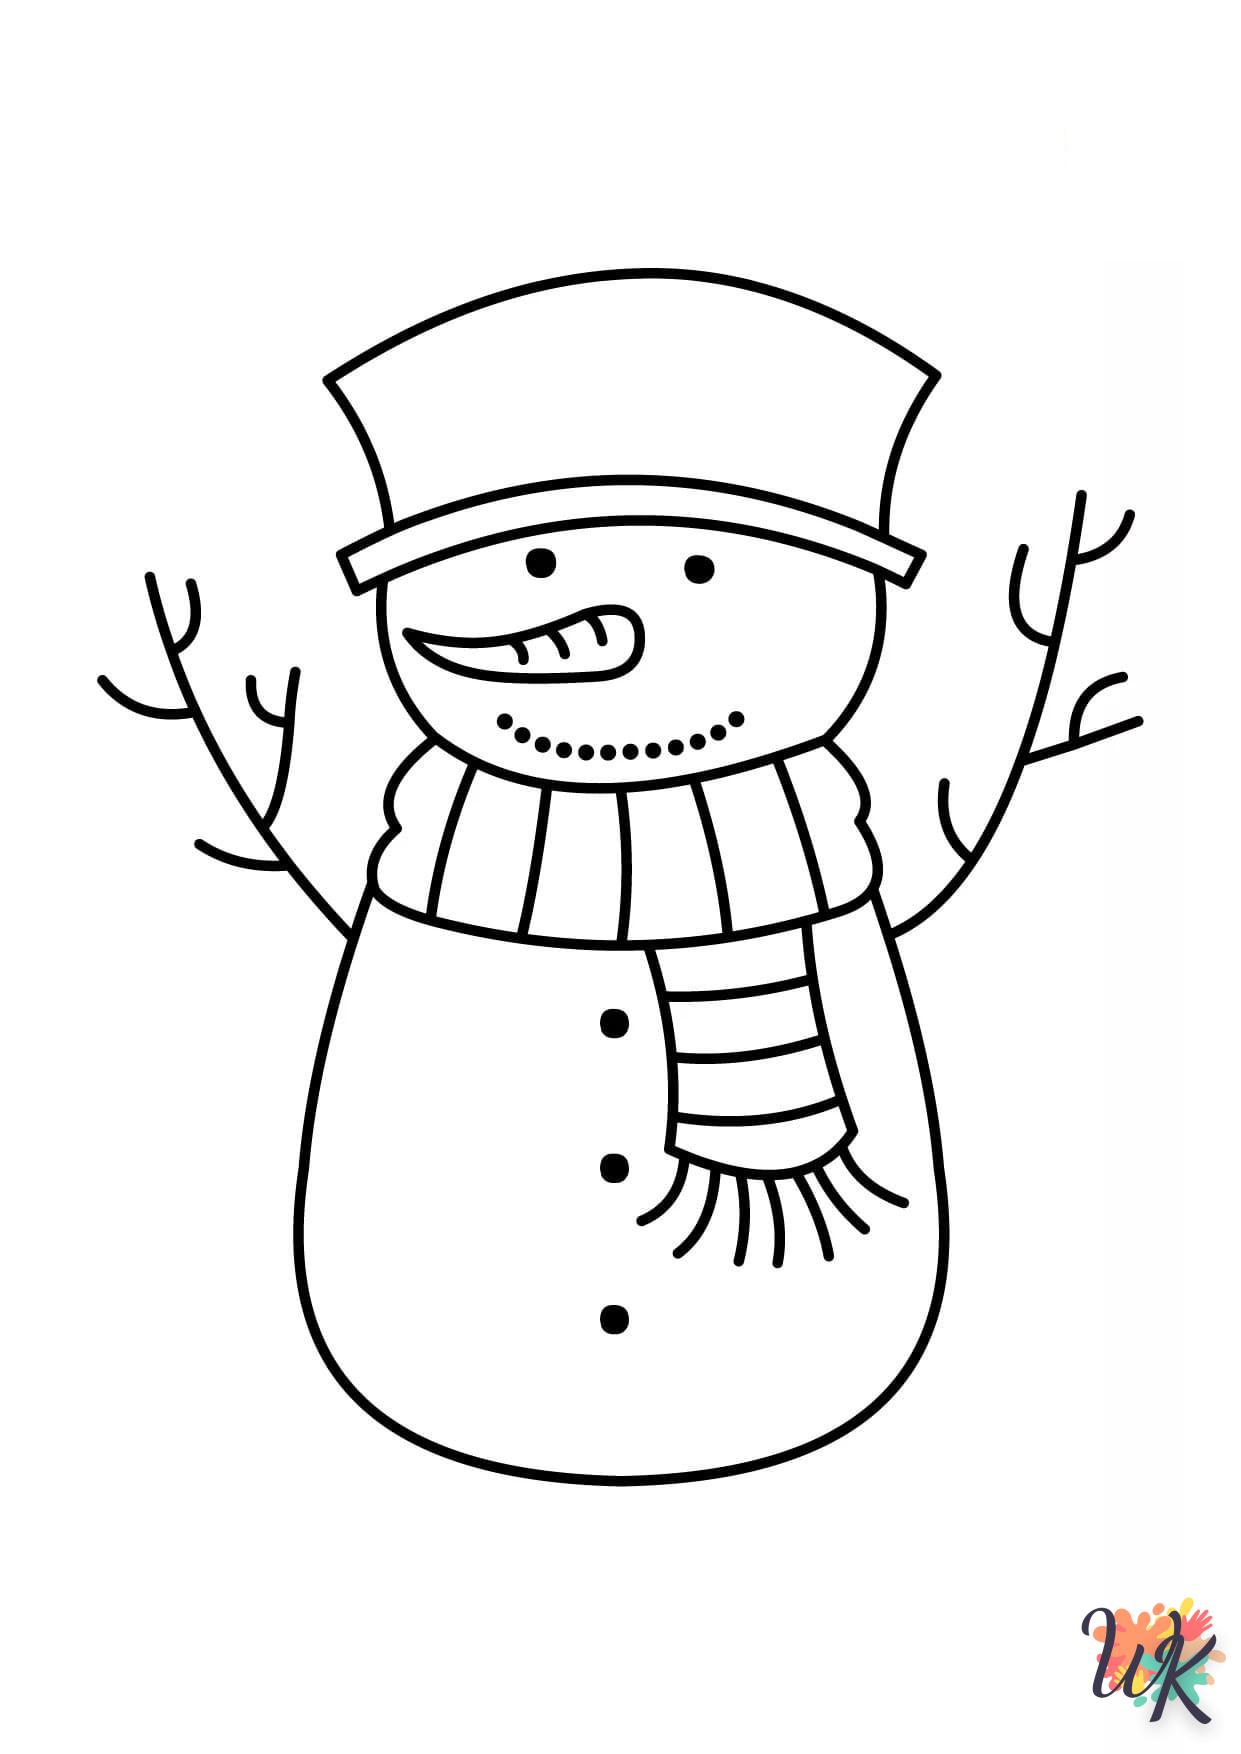 Snowman coloring page for children to print free